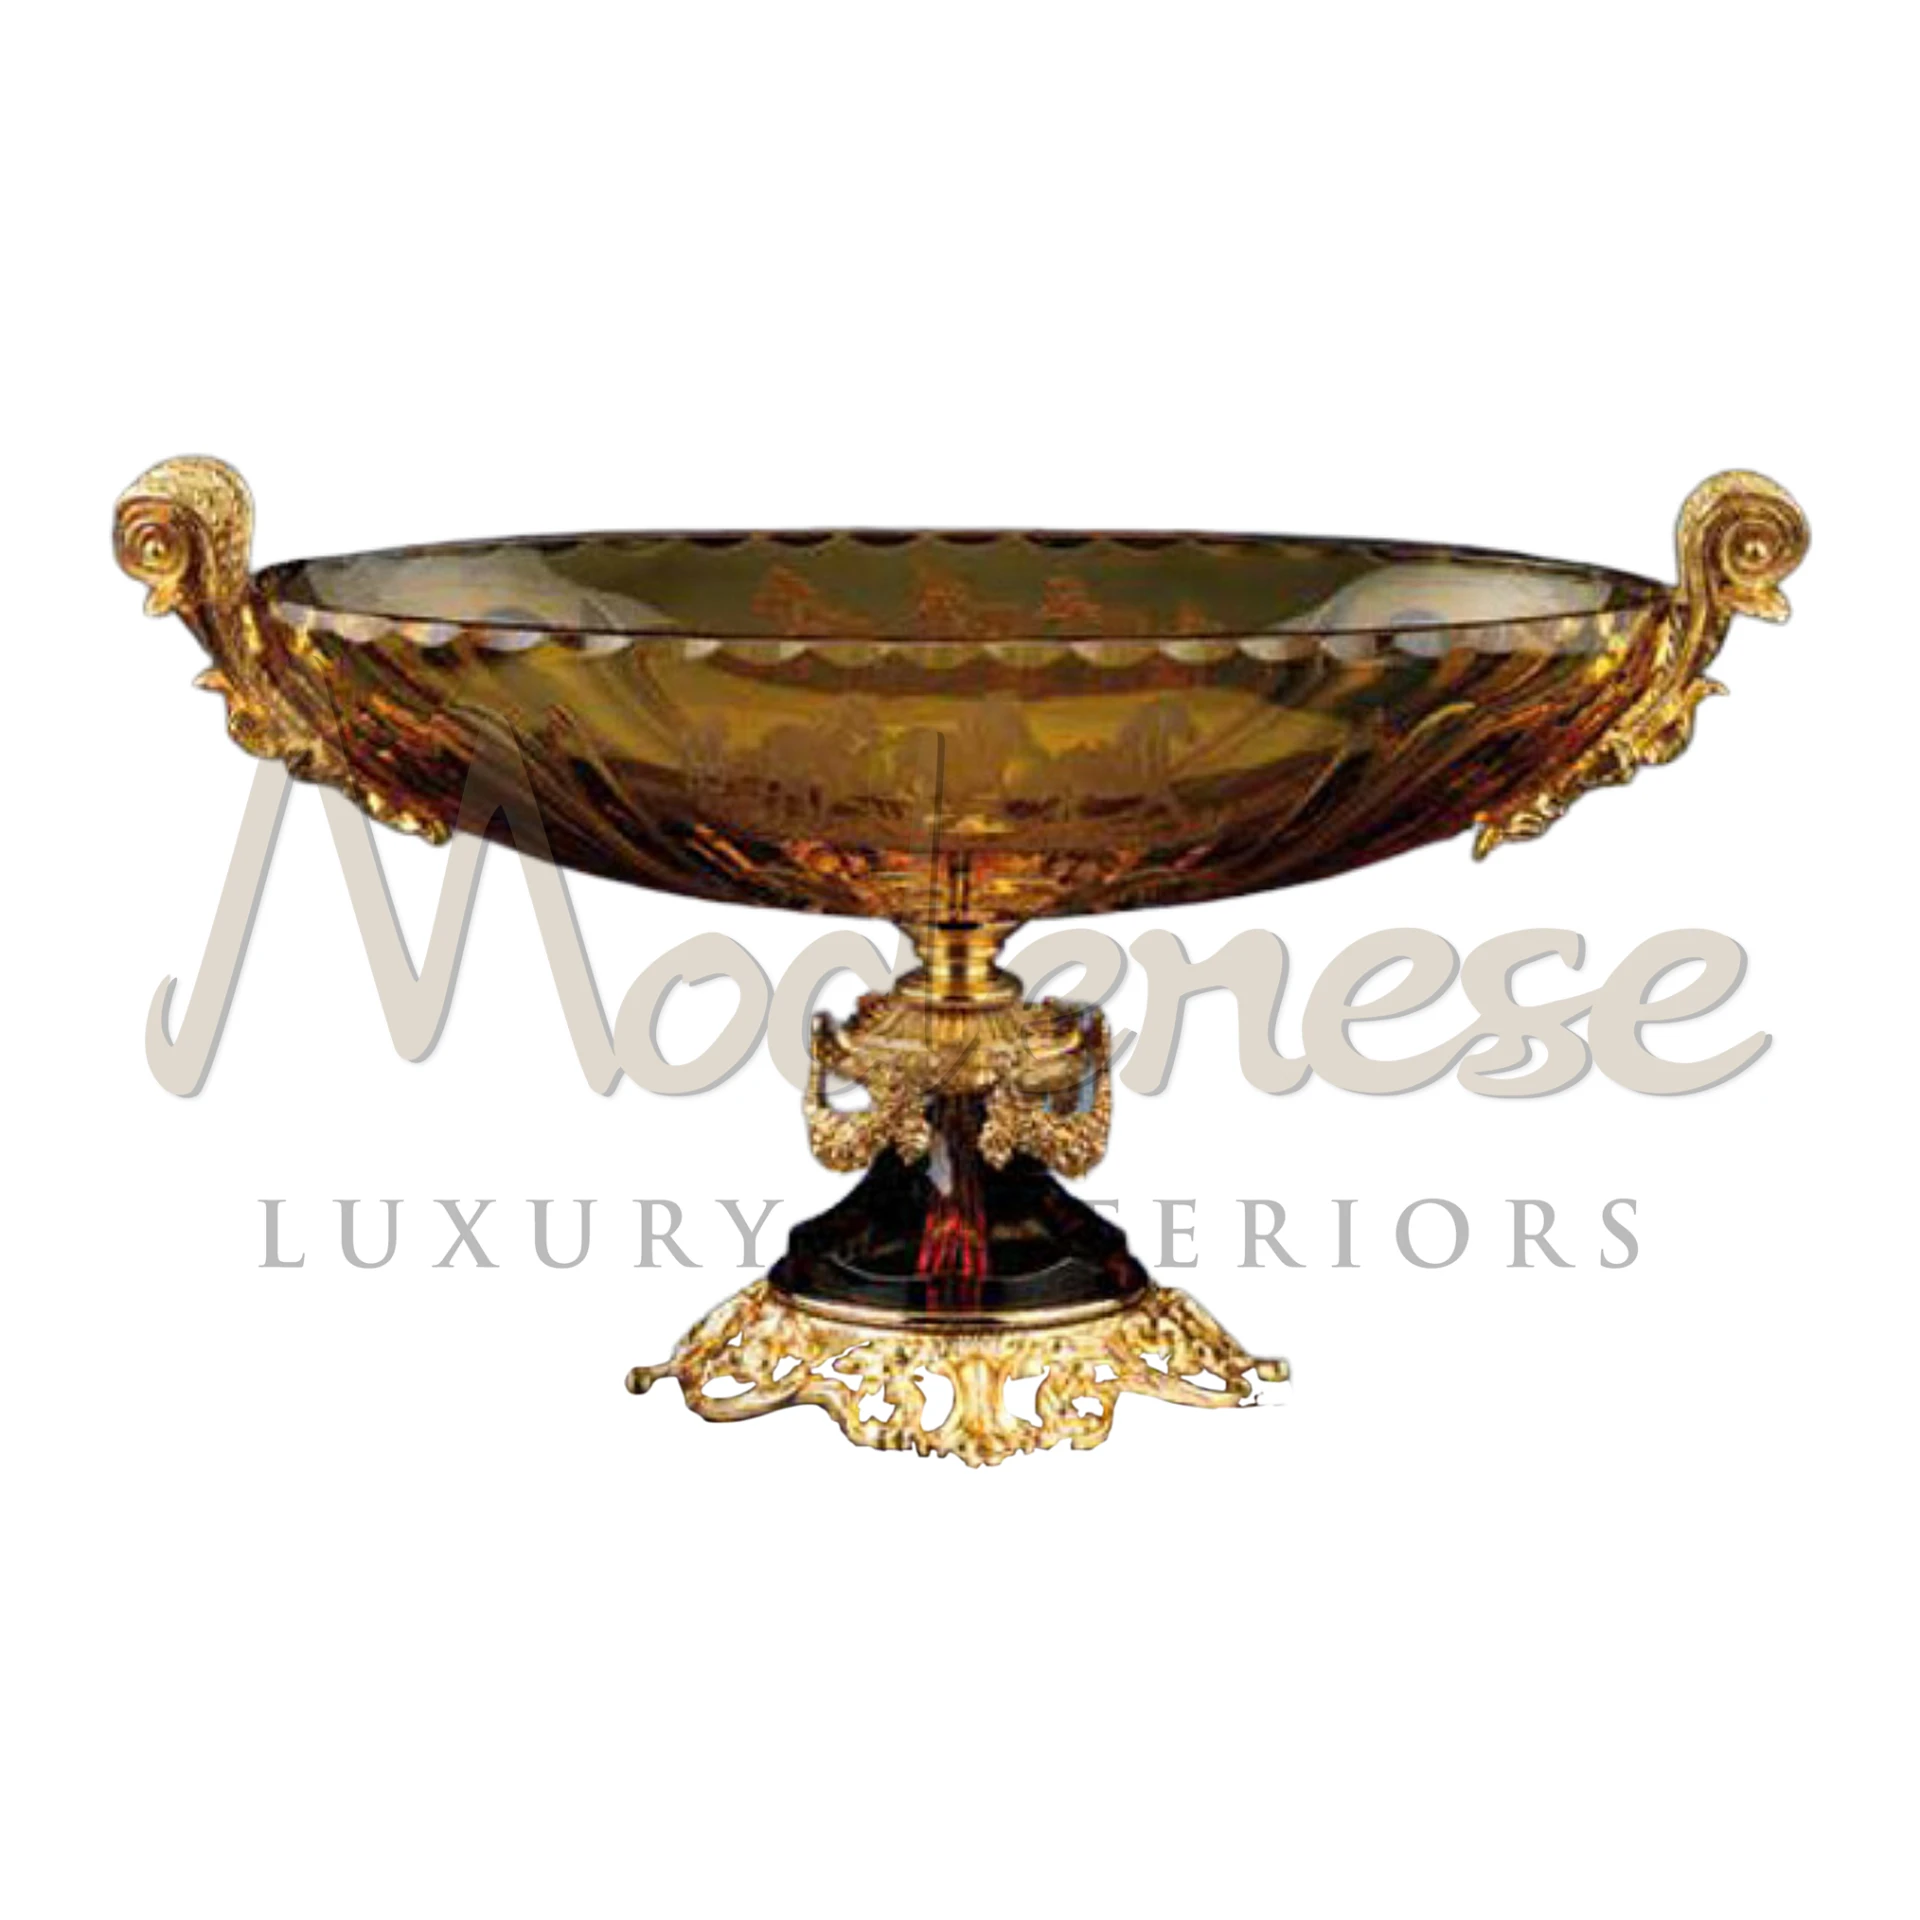 Luxury Italian vase, handcrafted with intricate designs, embodying timeless elegance for exclusive interior design in classic and baroque styles.






